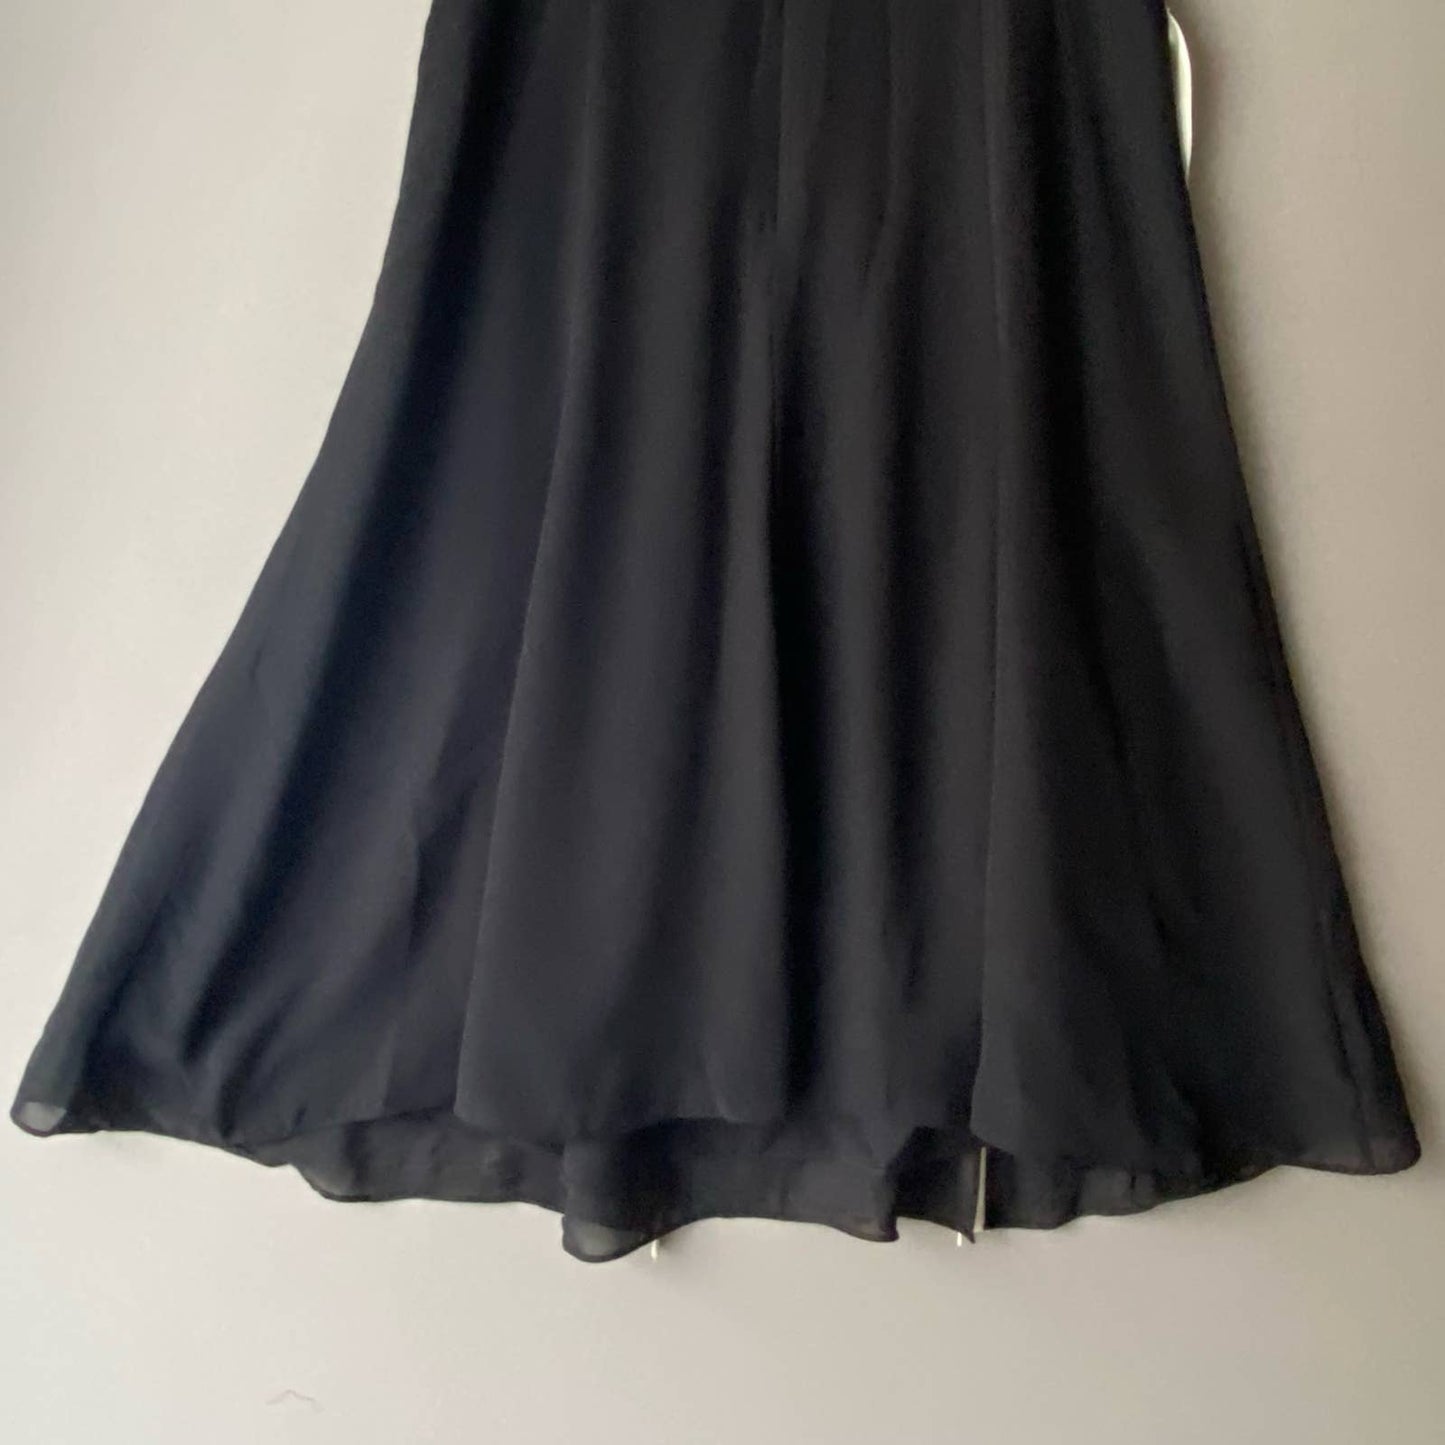 Adrianna Papell sz 12 A-line sheath 40's inspired cocktail dress